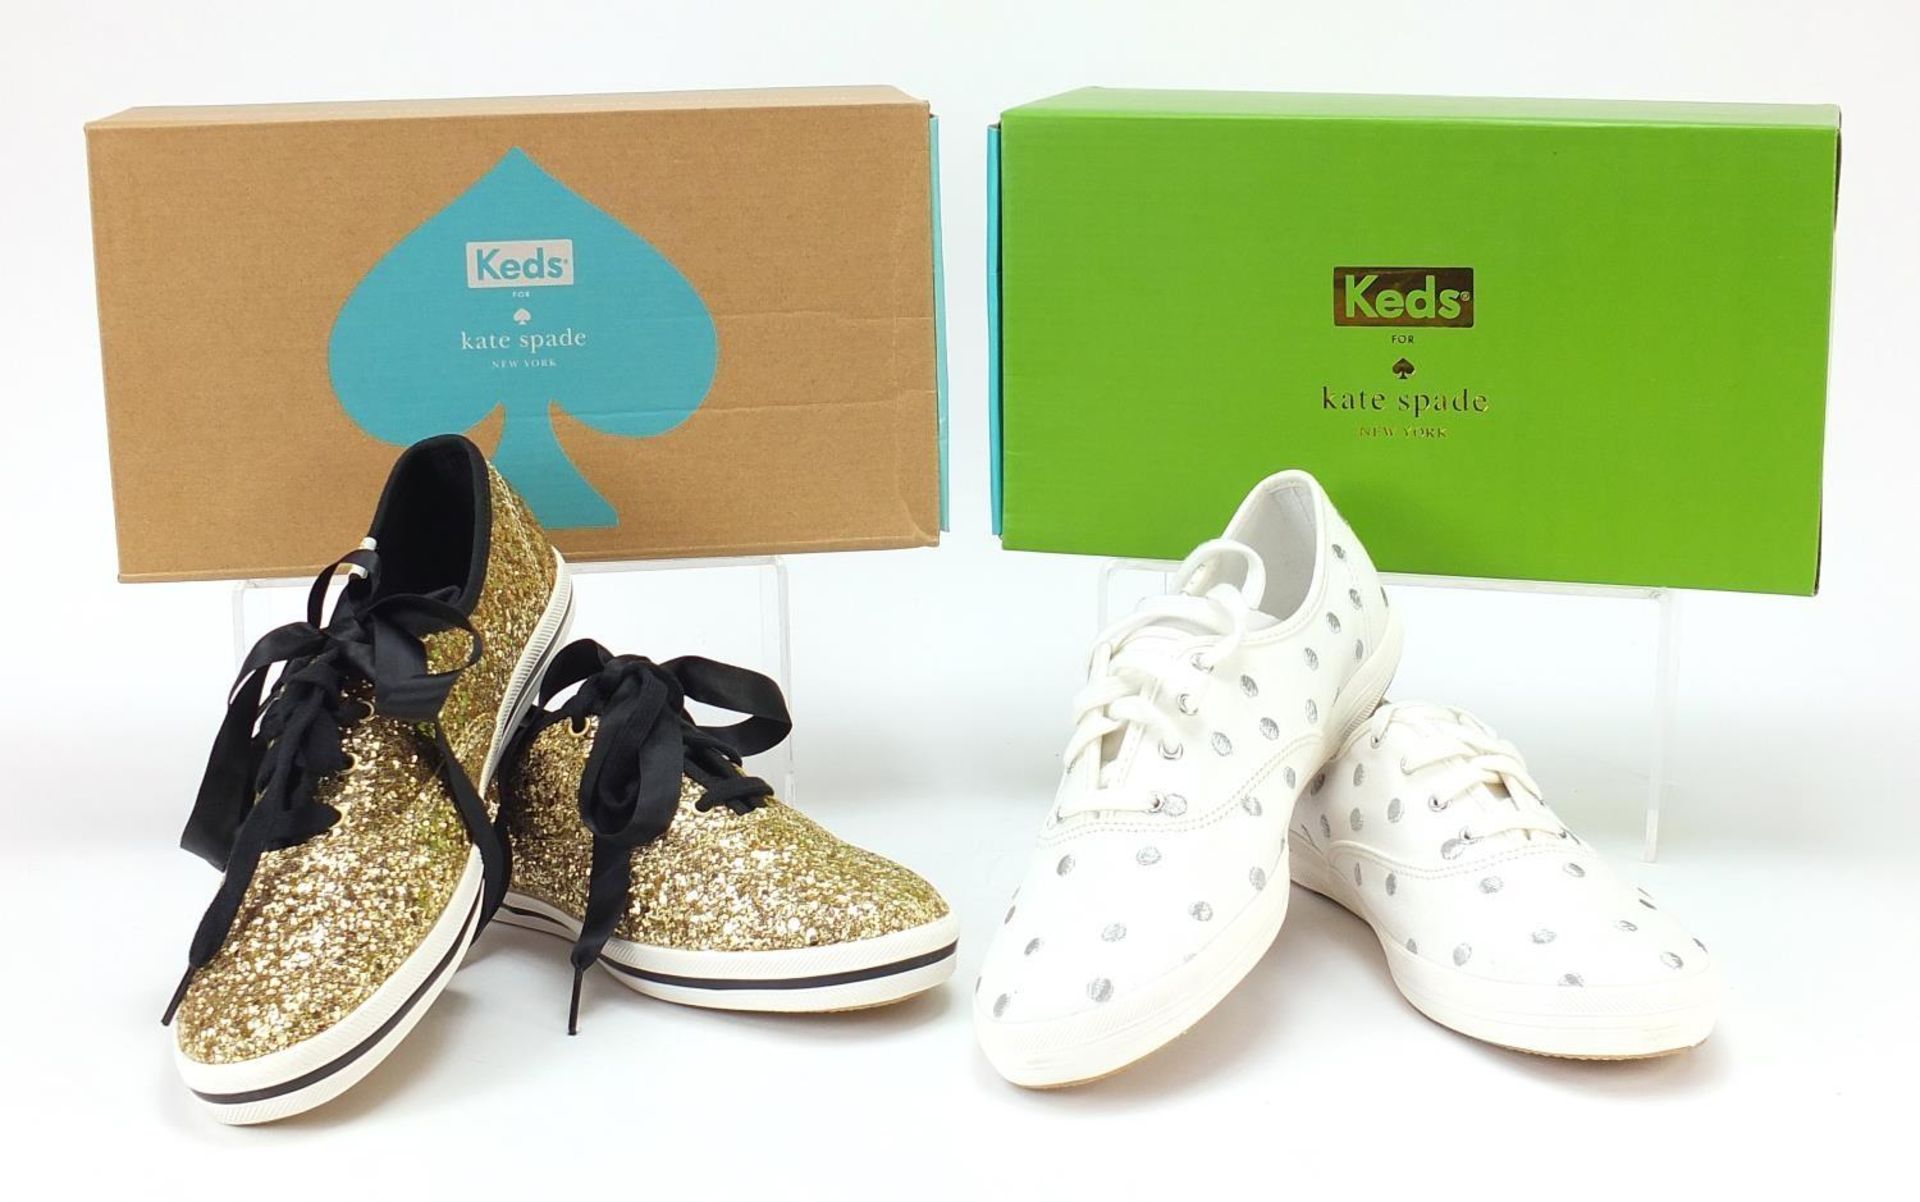 Two pairs of Kate Spade sneakers